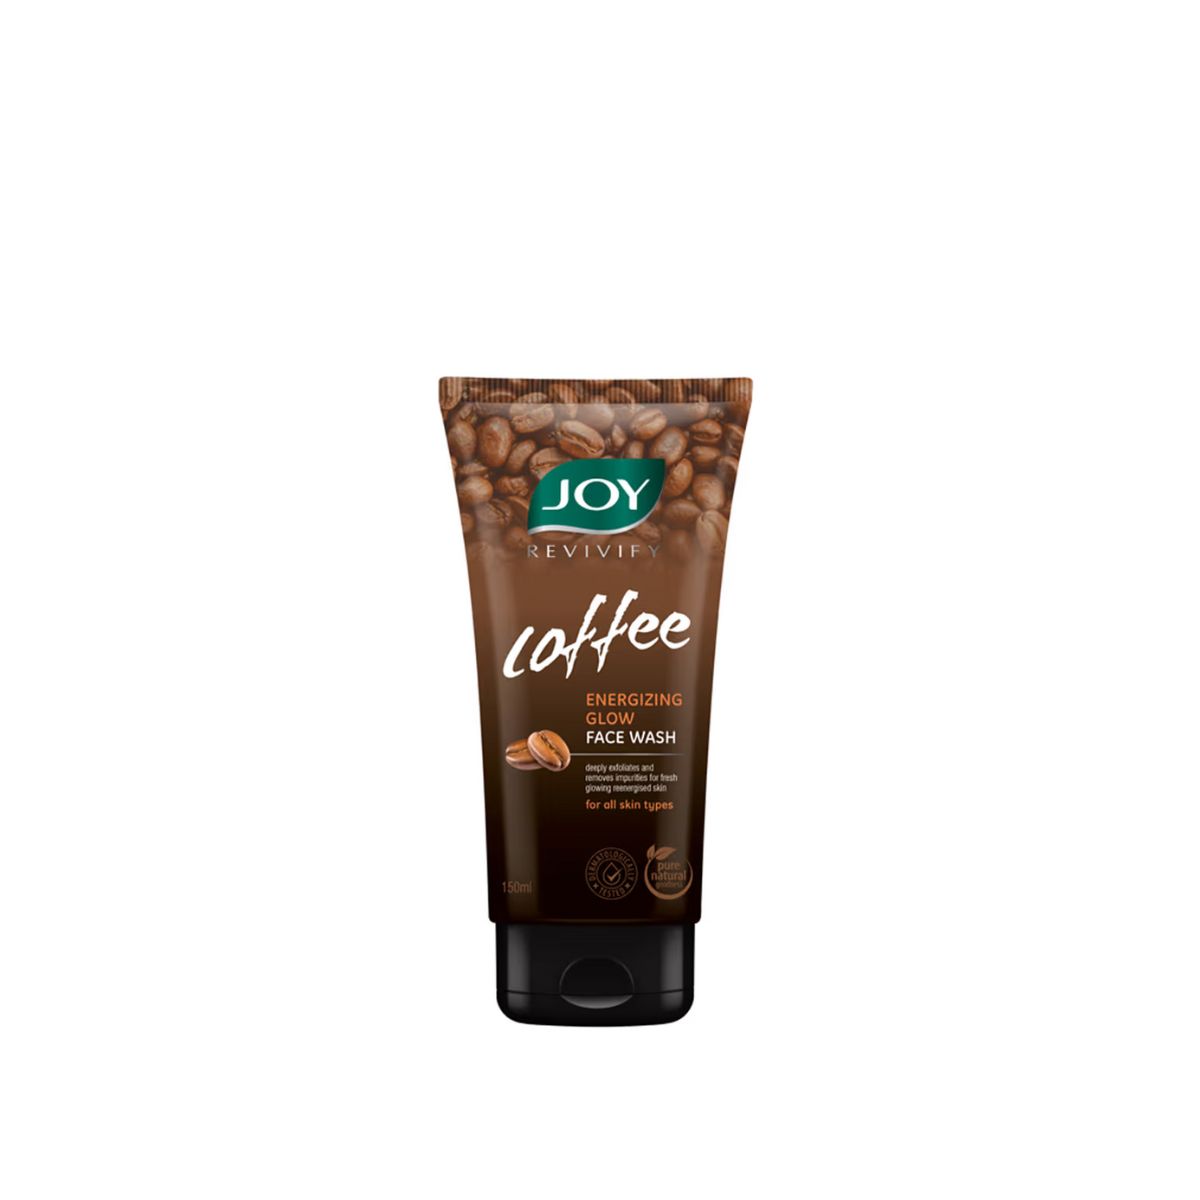 Joy Revivify - Coffee - Energizing Glow Face Wash - Pure Natural Goodness - 150ml